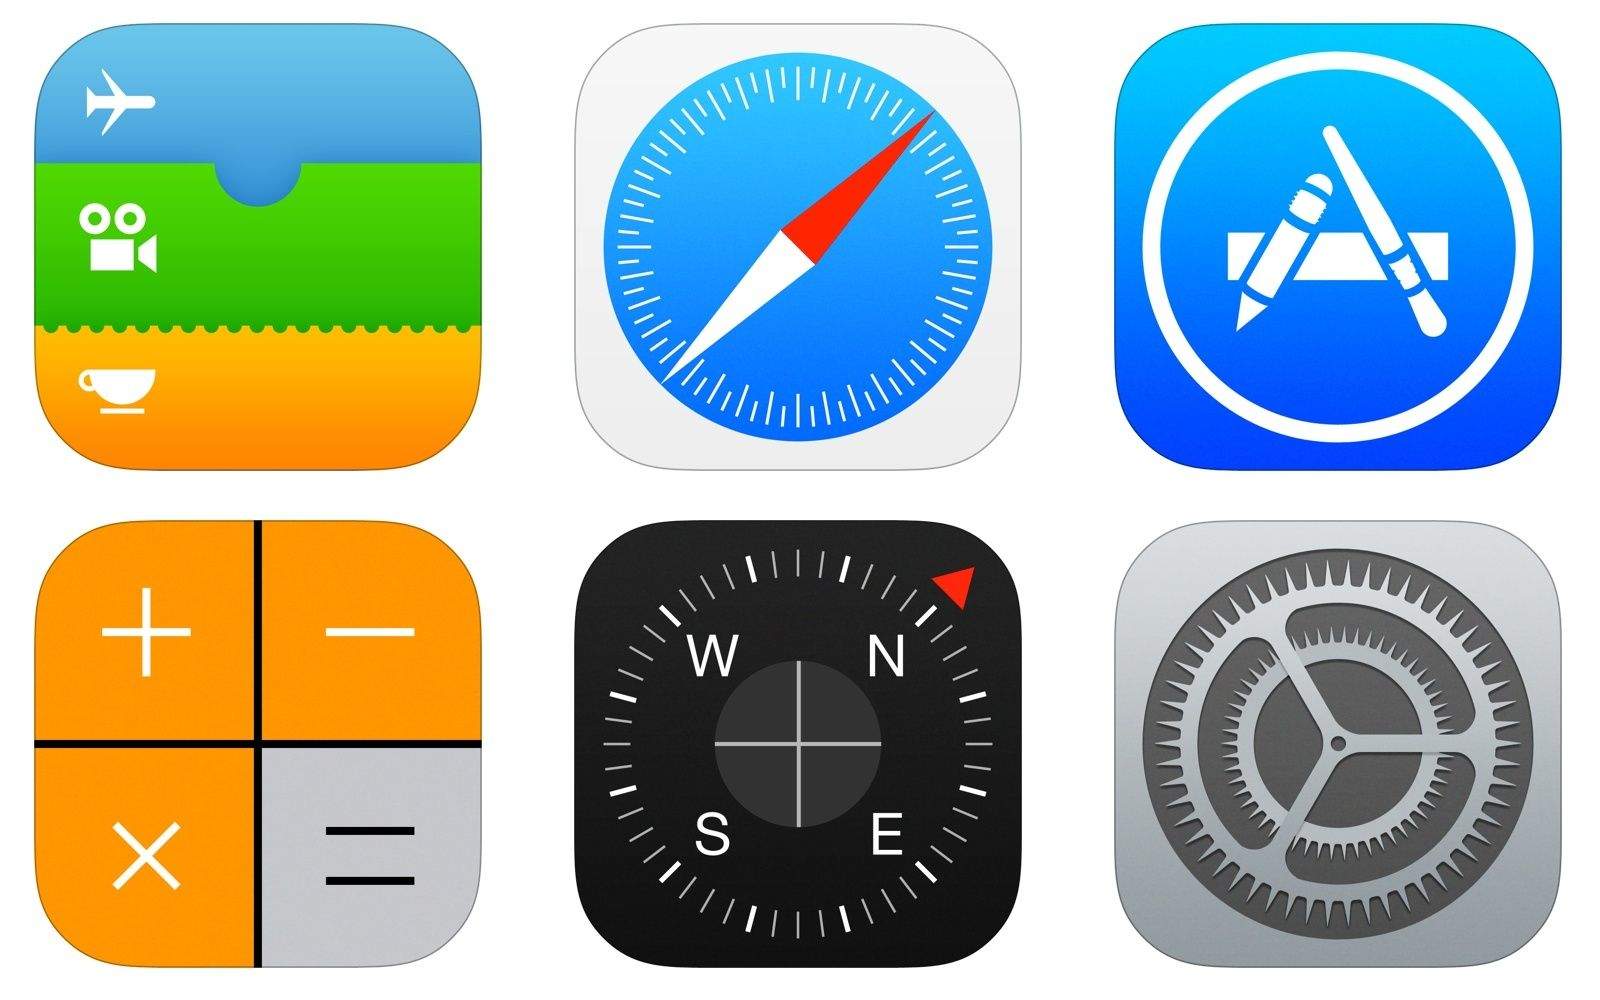 iPhone Settings App Logo - How to animate iOS 9's app icons